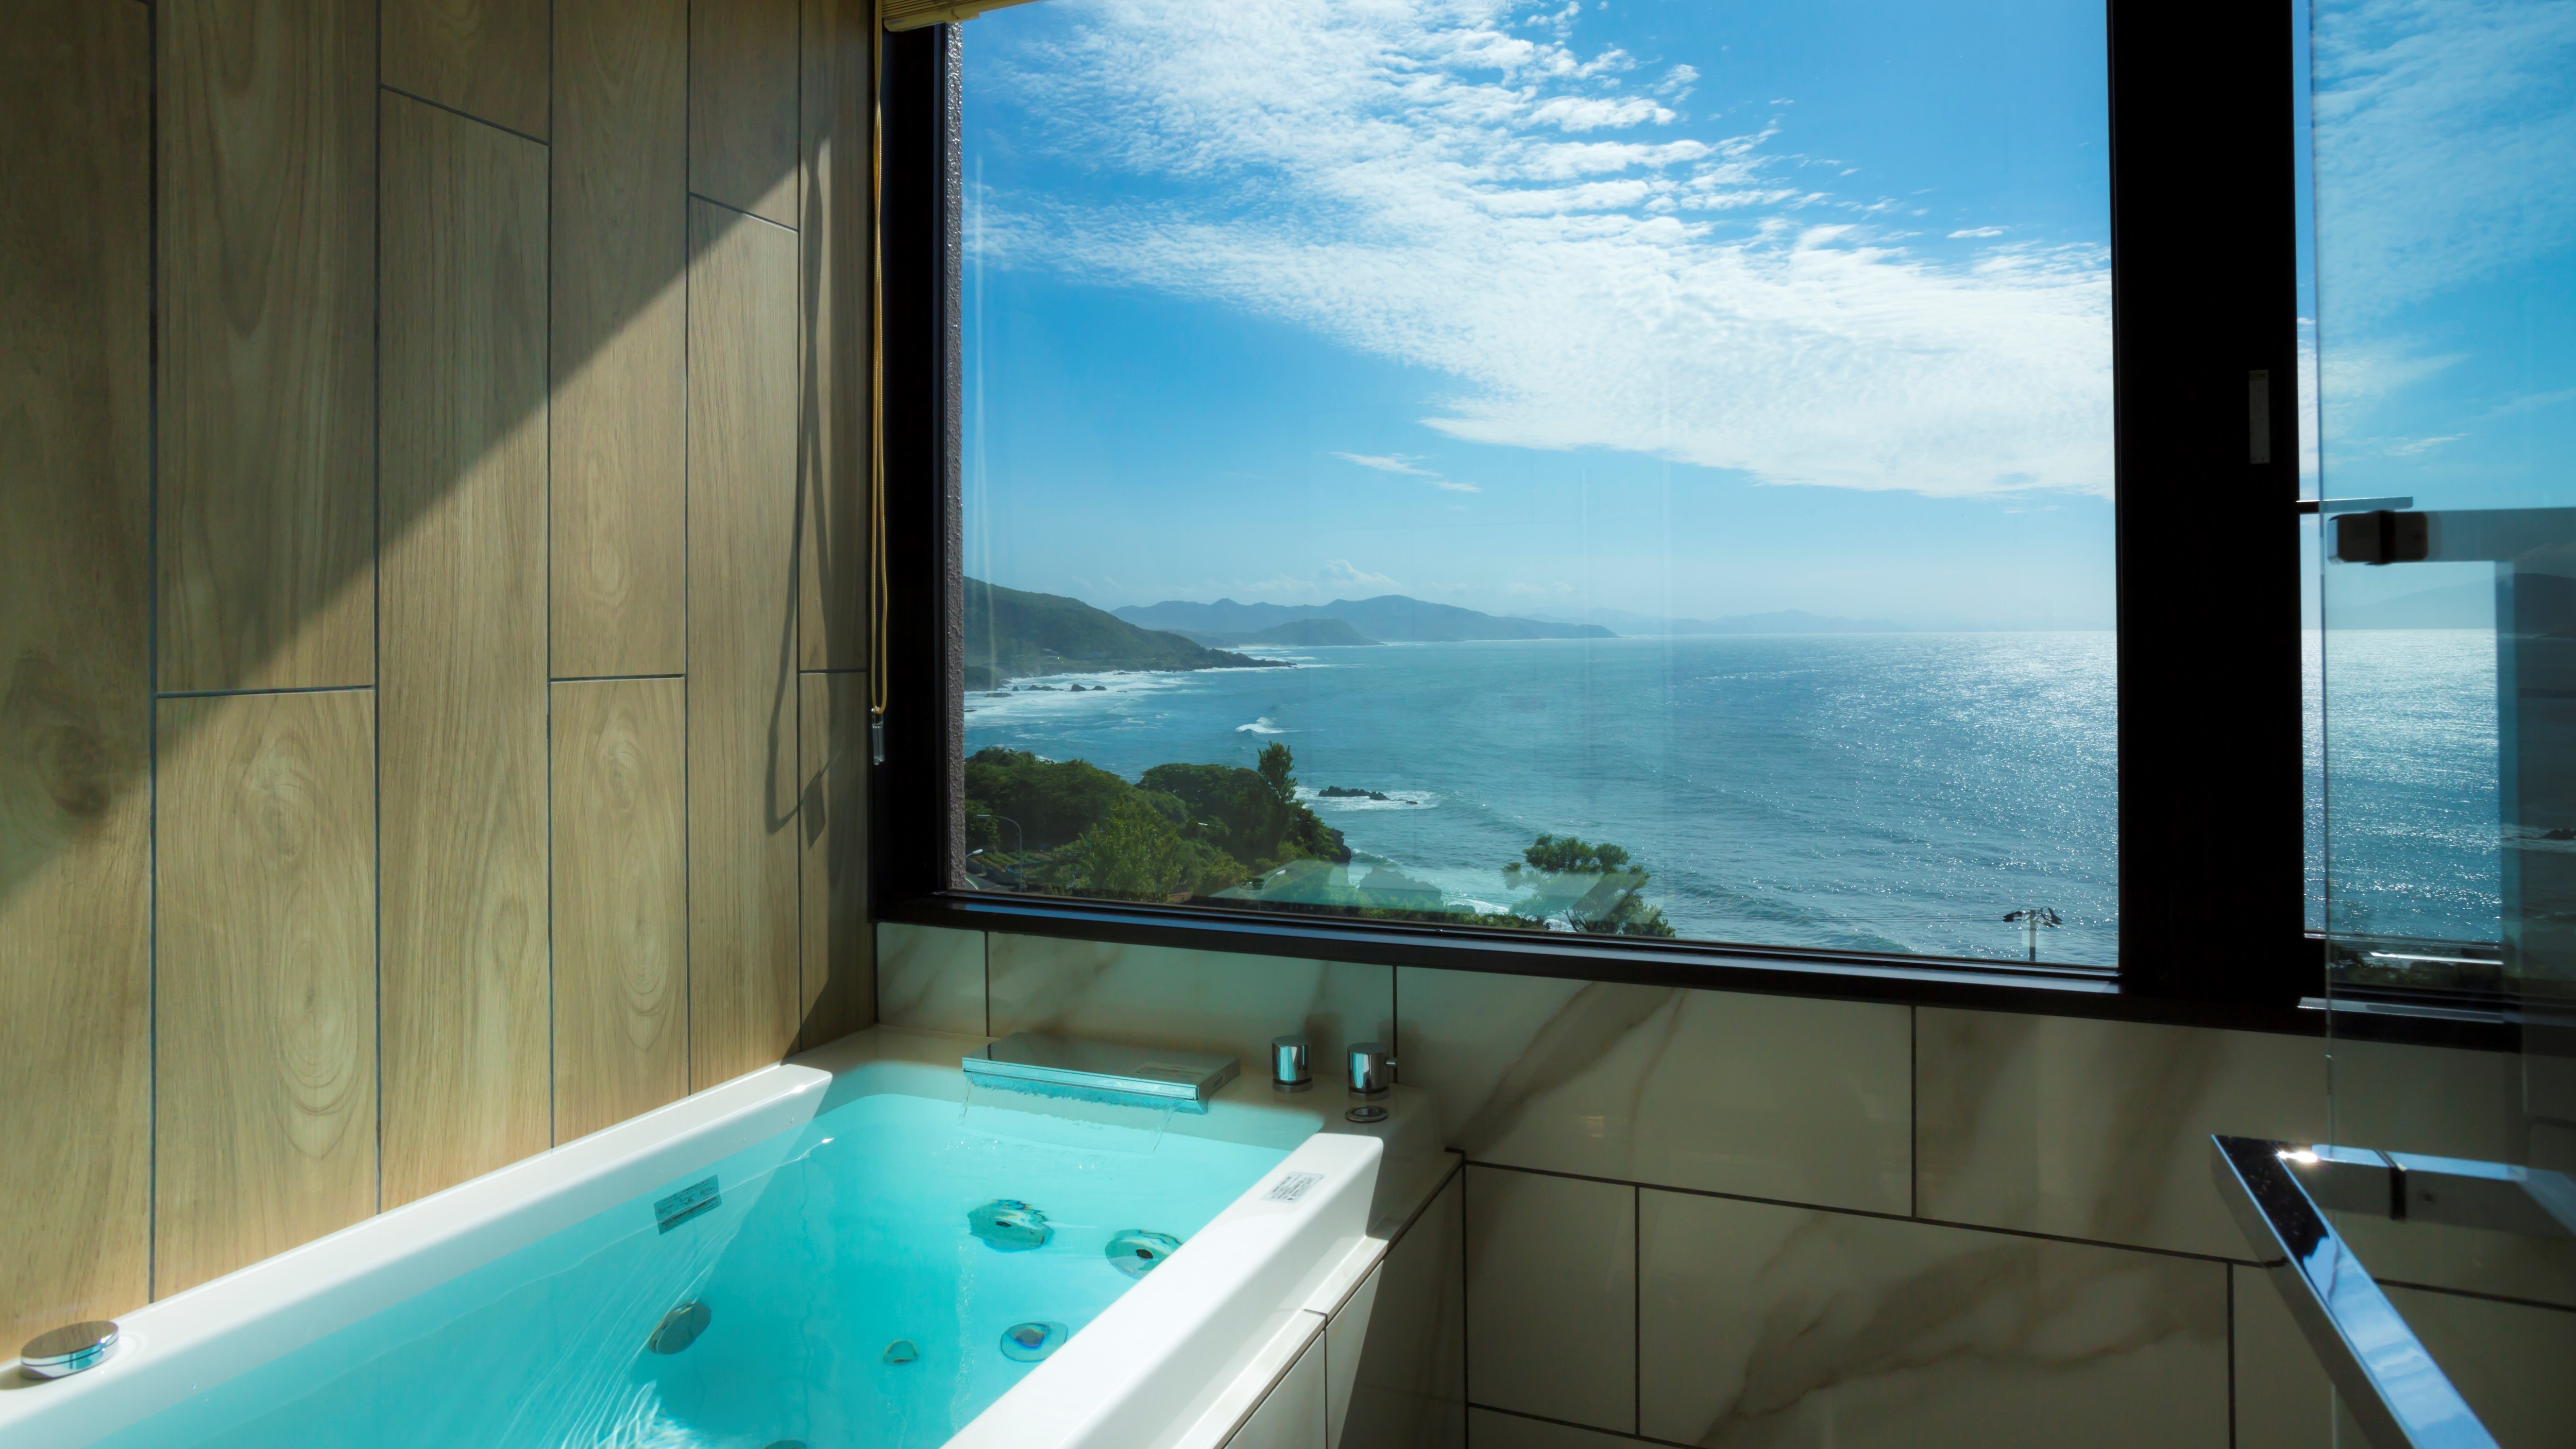 [Top floor special room "Tenku"] You can overlook the beautiful sea from the guest room observation bath with ocean view.